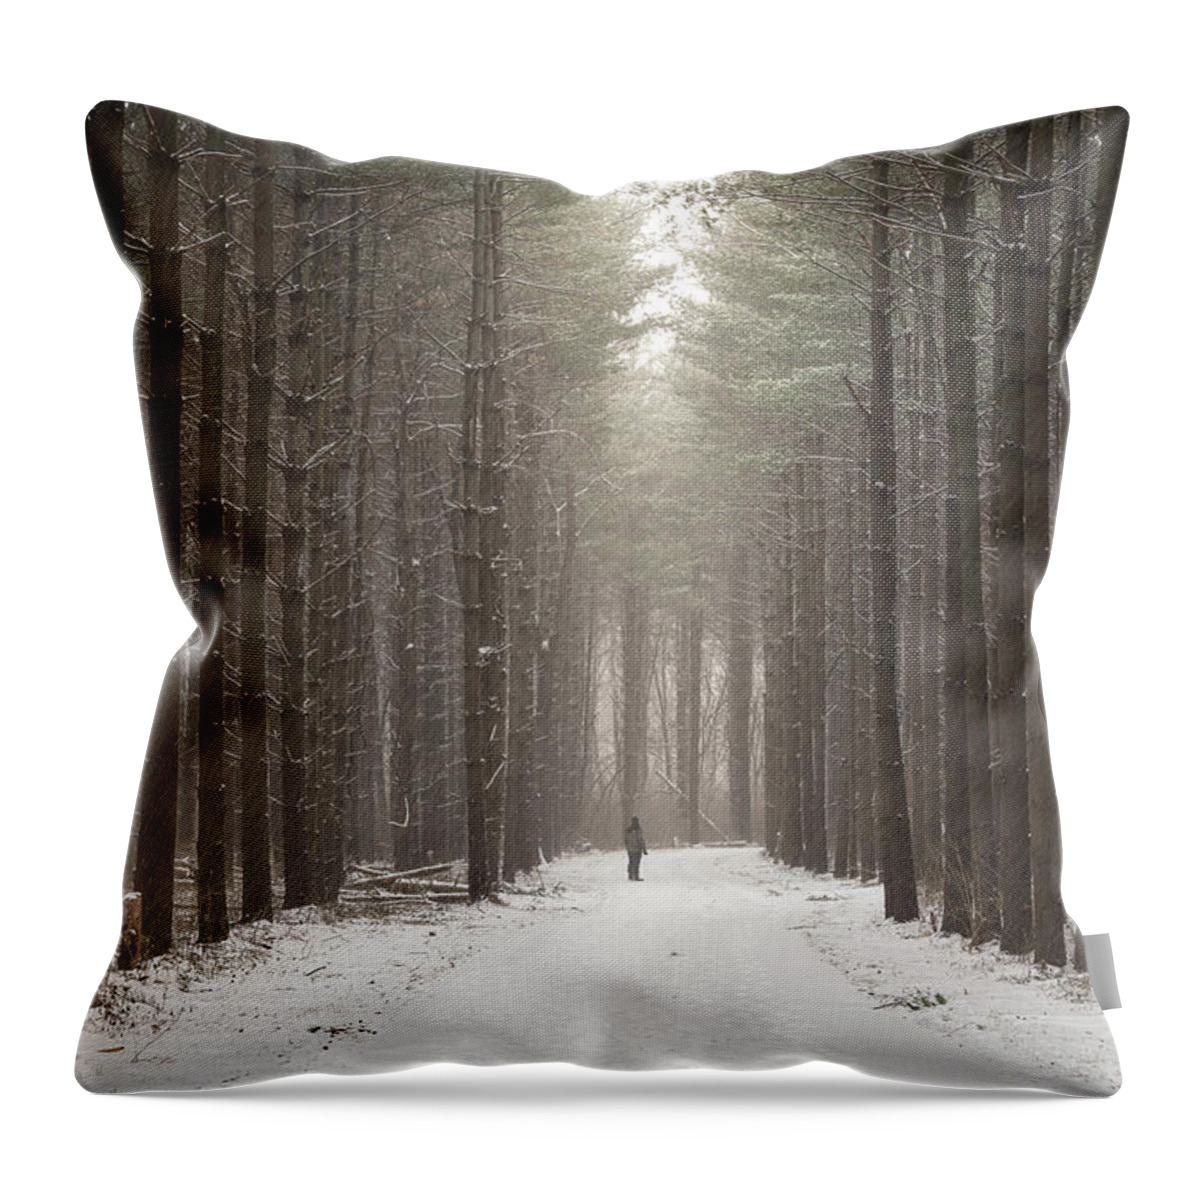 Mystical Throw Pillow featuring the photograph The Tall Pines by Arthur Oleary